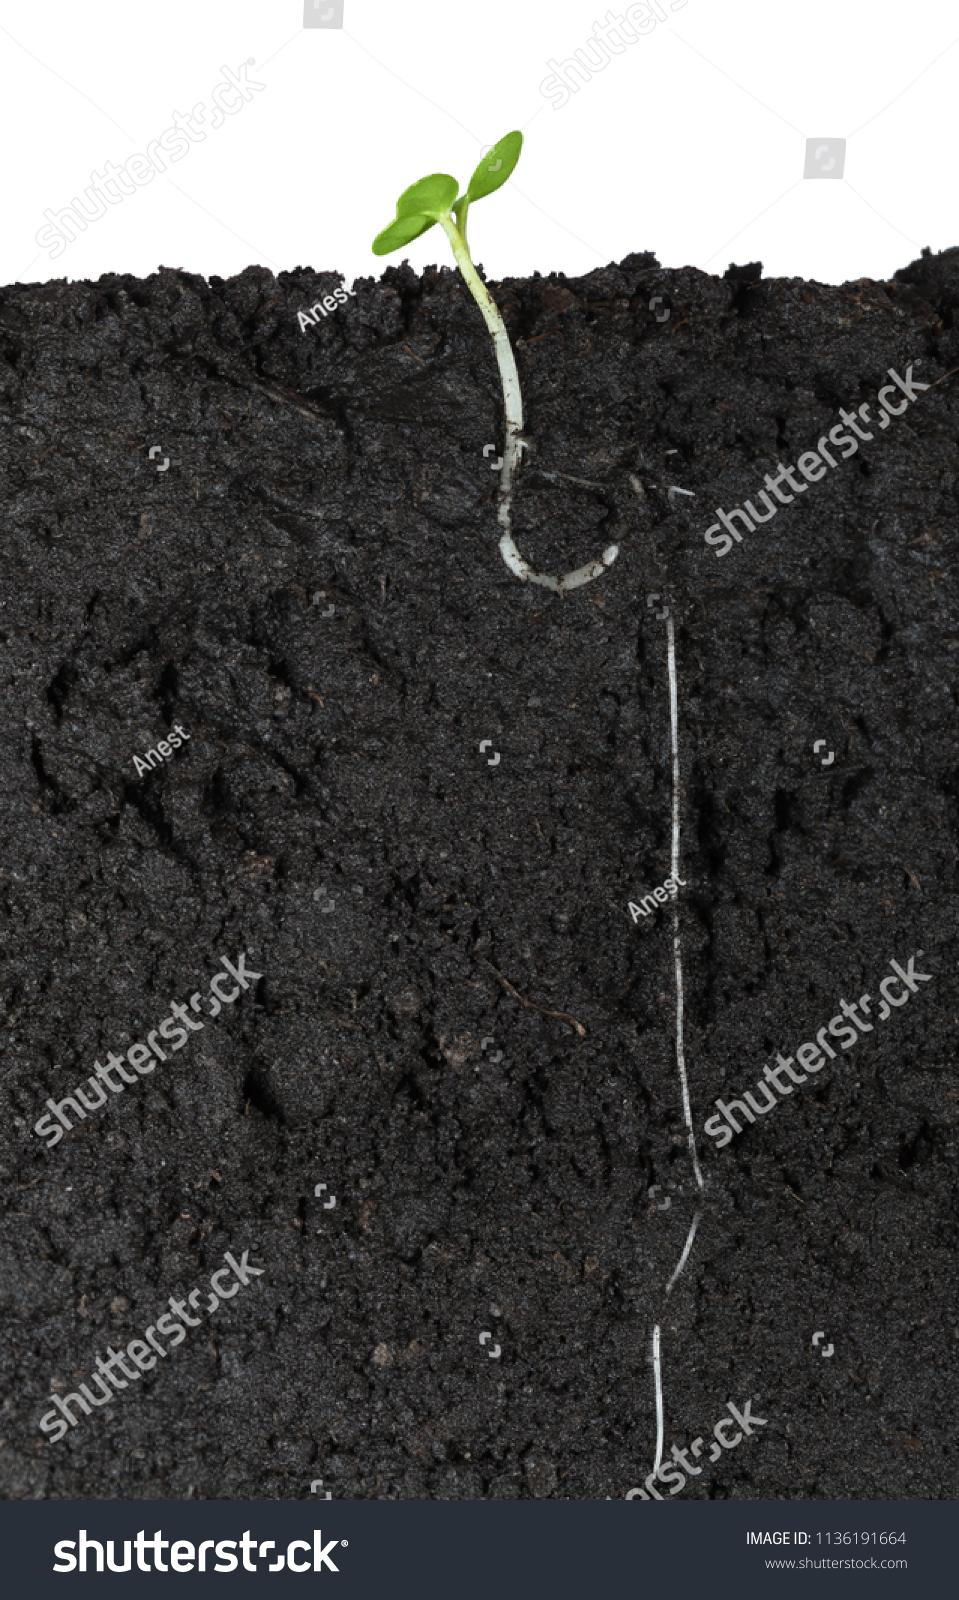 In field sectional view of young green cabbage sprout with long root underground isolated on white
 #1136191664